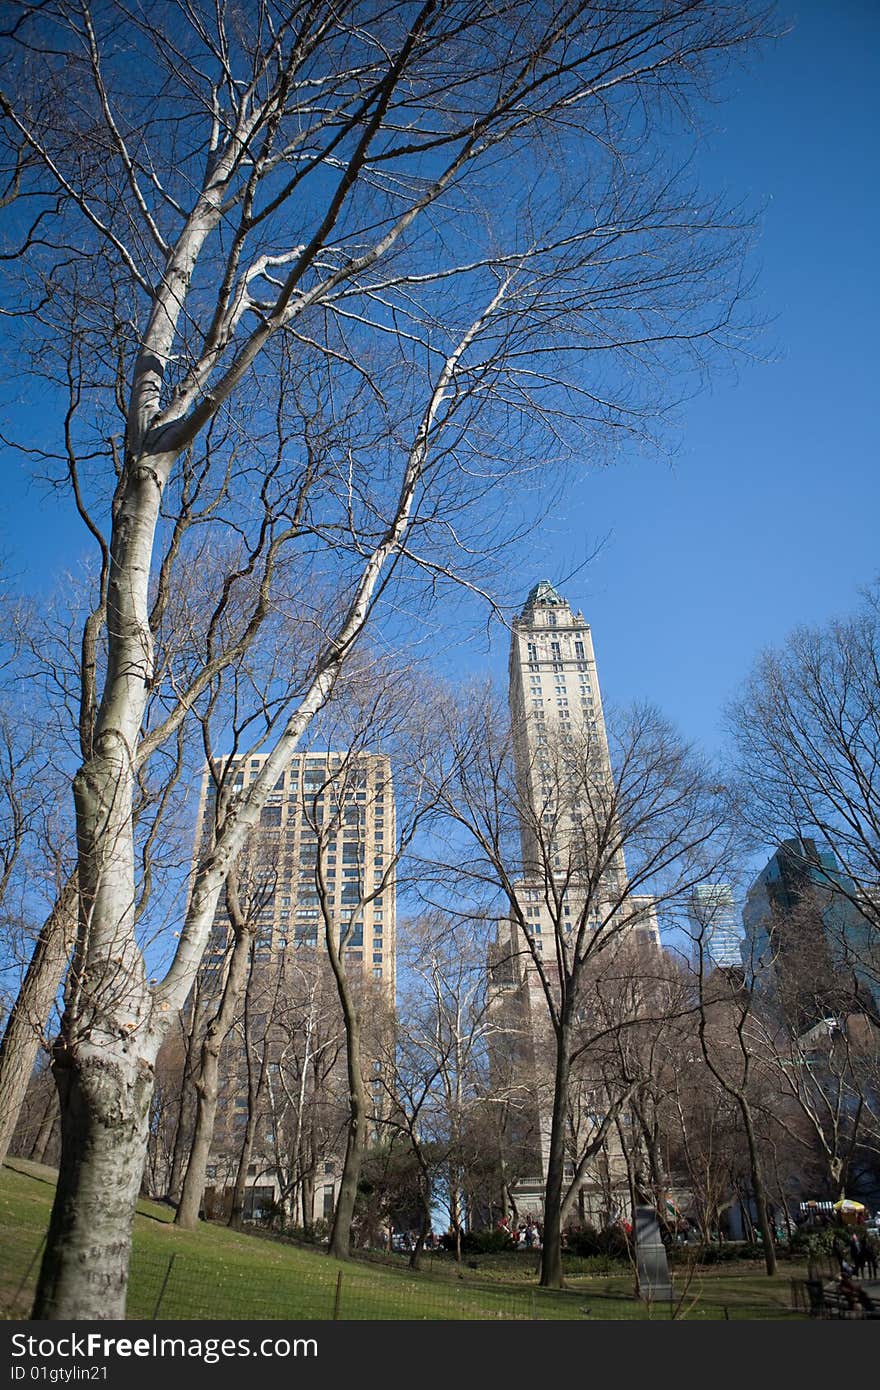 Trees without their leaves on a sunny day in Central Park in New York City. Trees without their leaves on a sunny day in Central Park in New York City